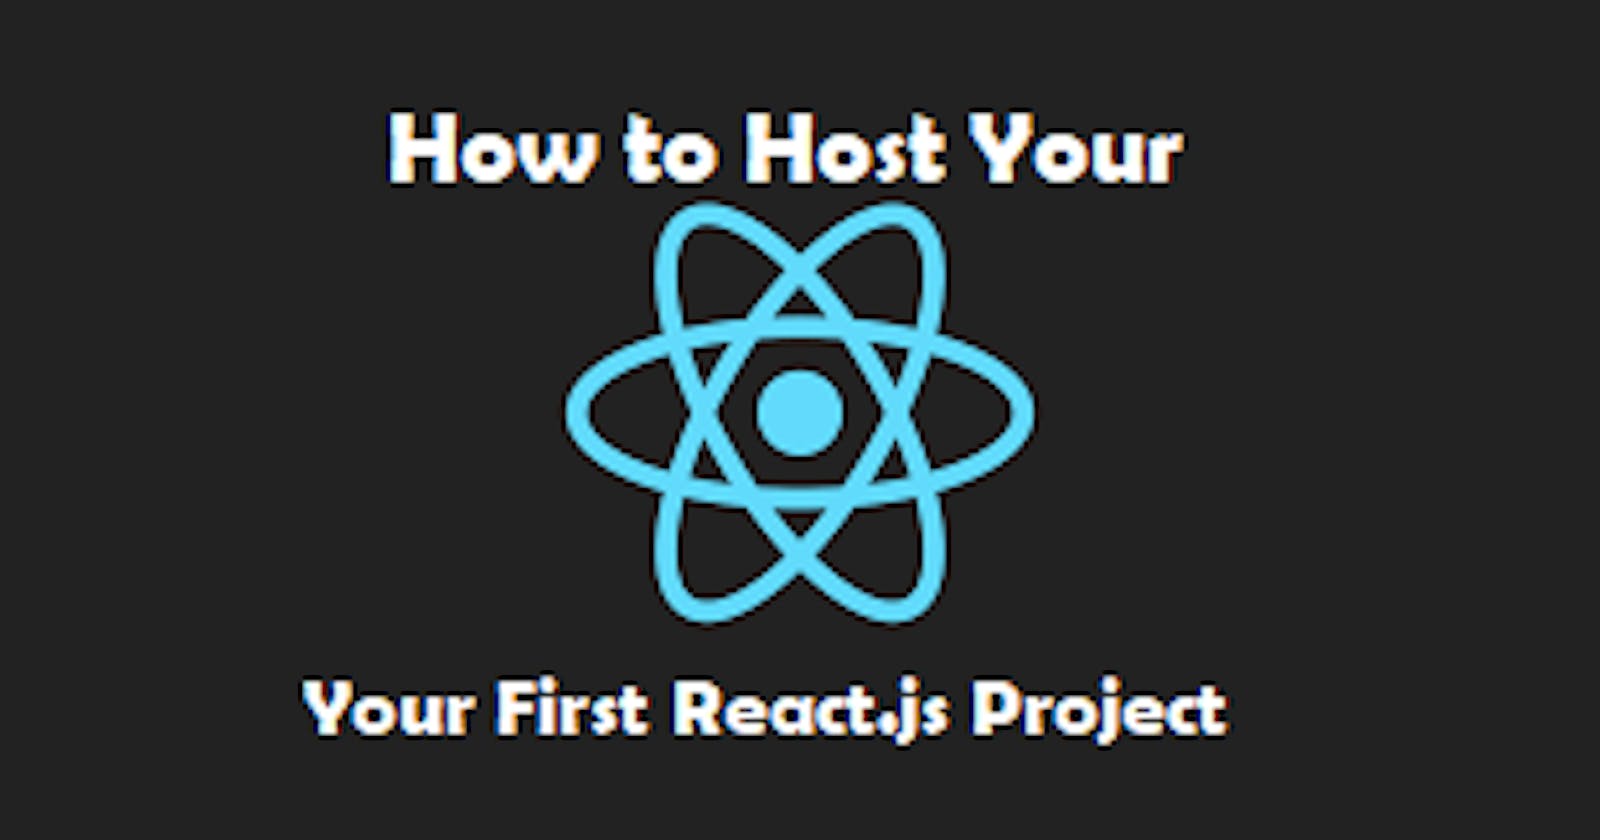 How to host a React Project for free